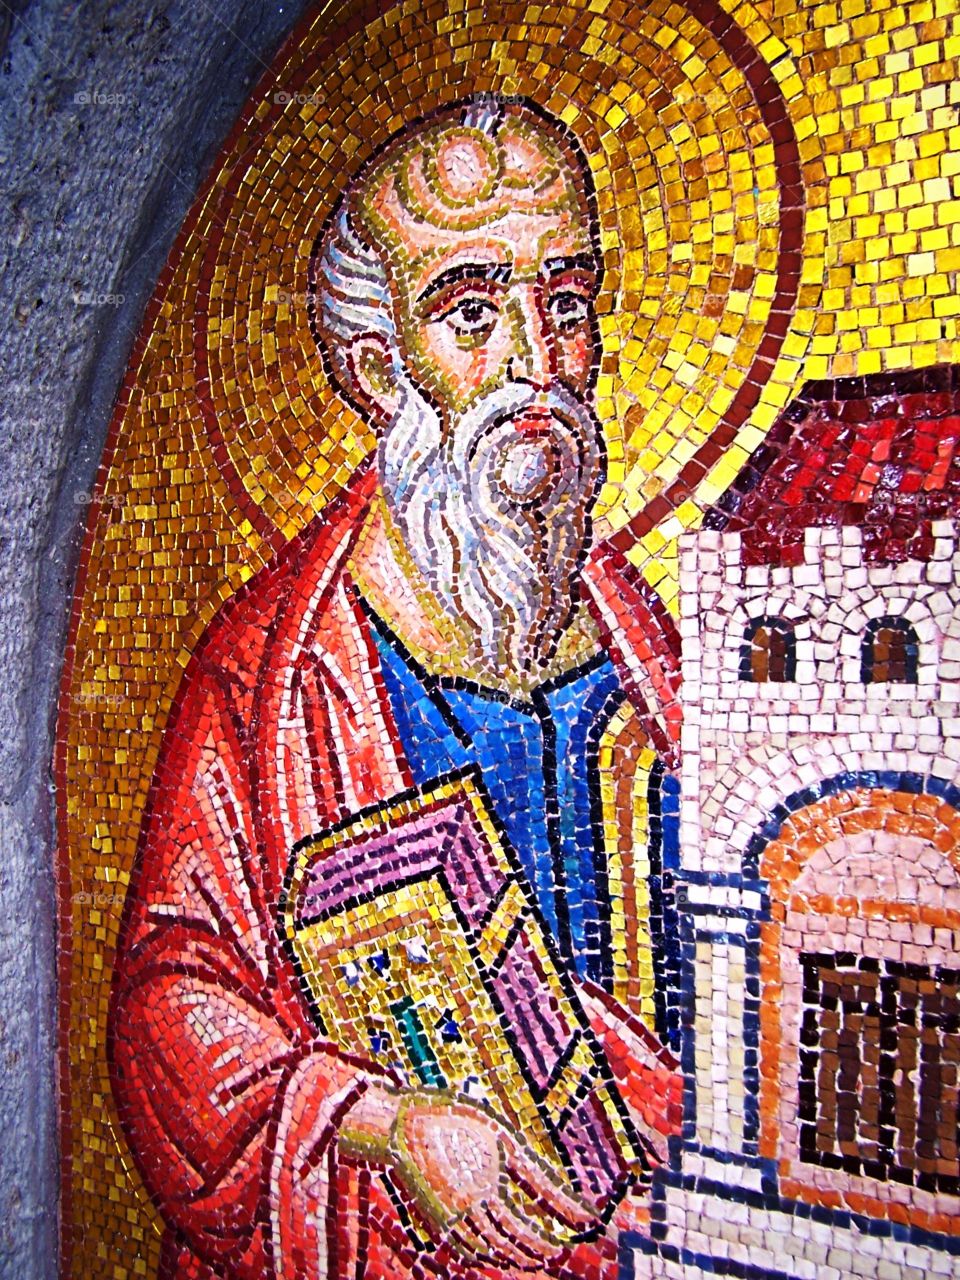 Mosaic of Saint John in a Grotto on the Isle of Patmos in Greece